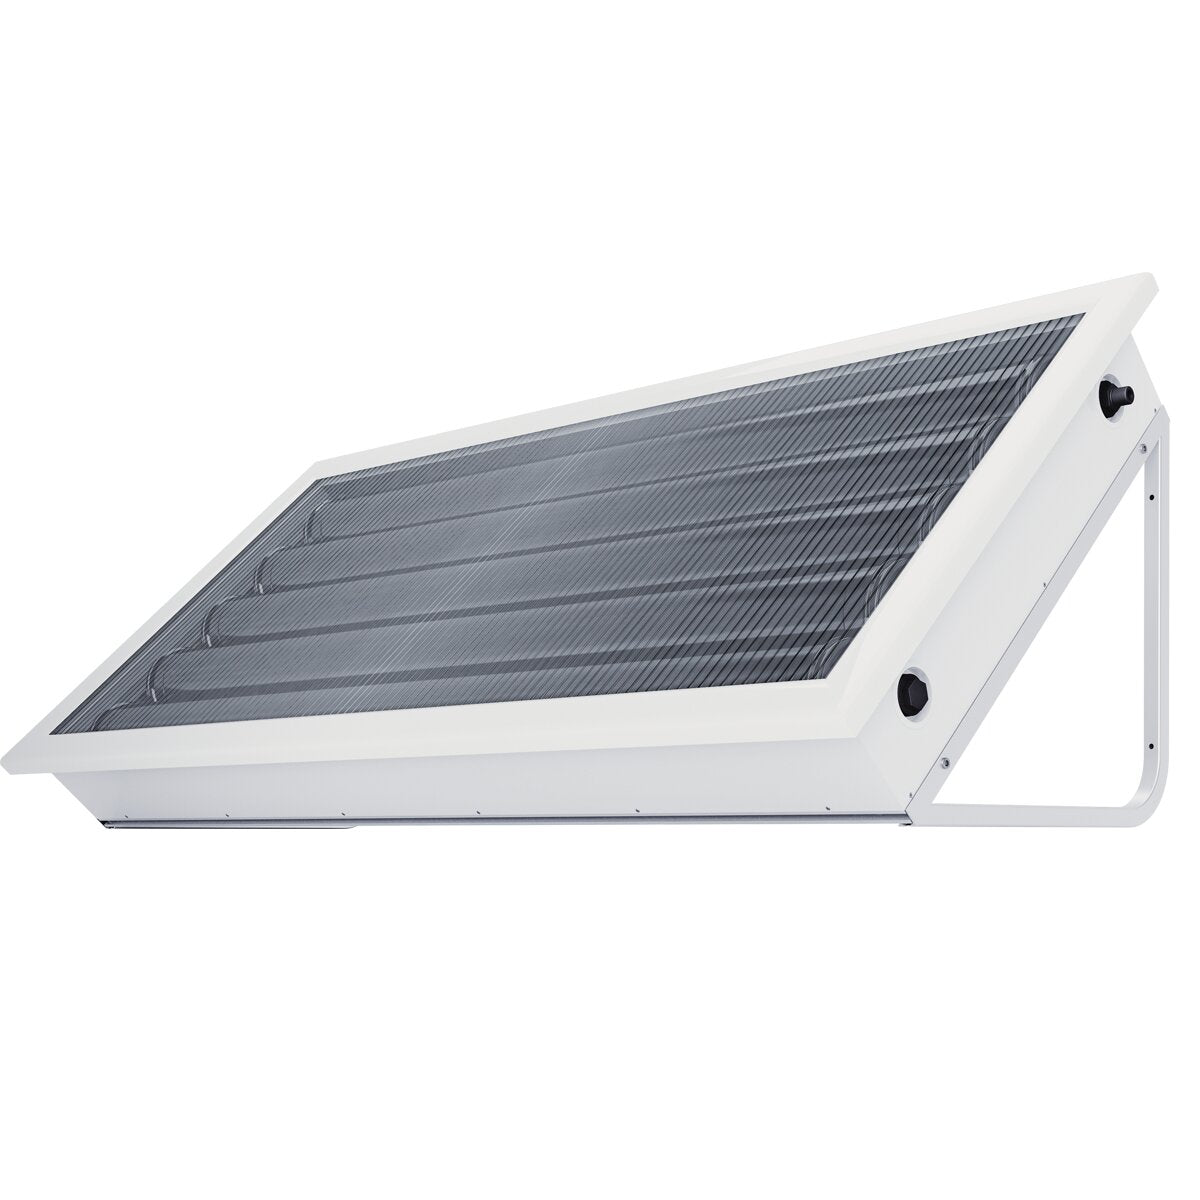 Pleion Ego 110 white natural circulation solar panel 105 liters flat and inclined roof